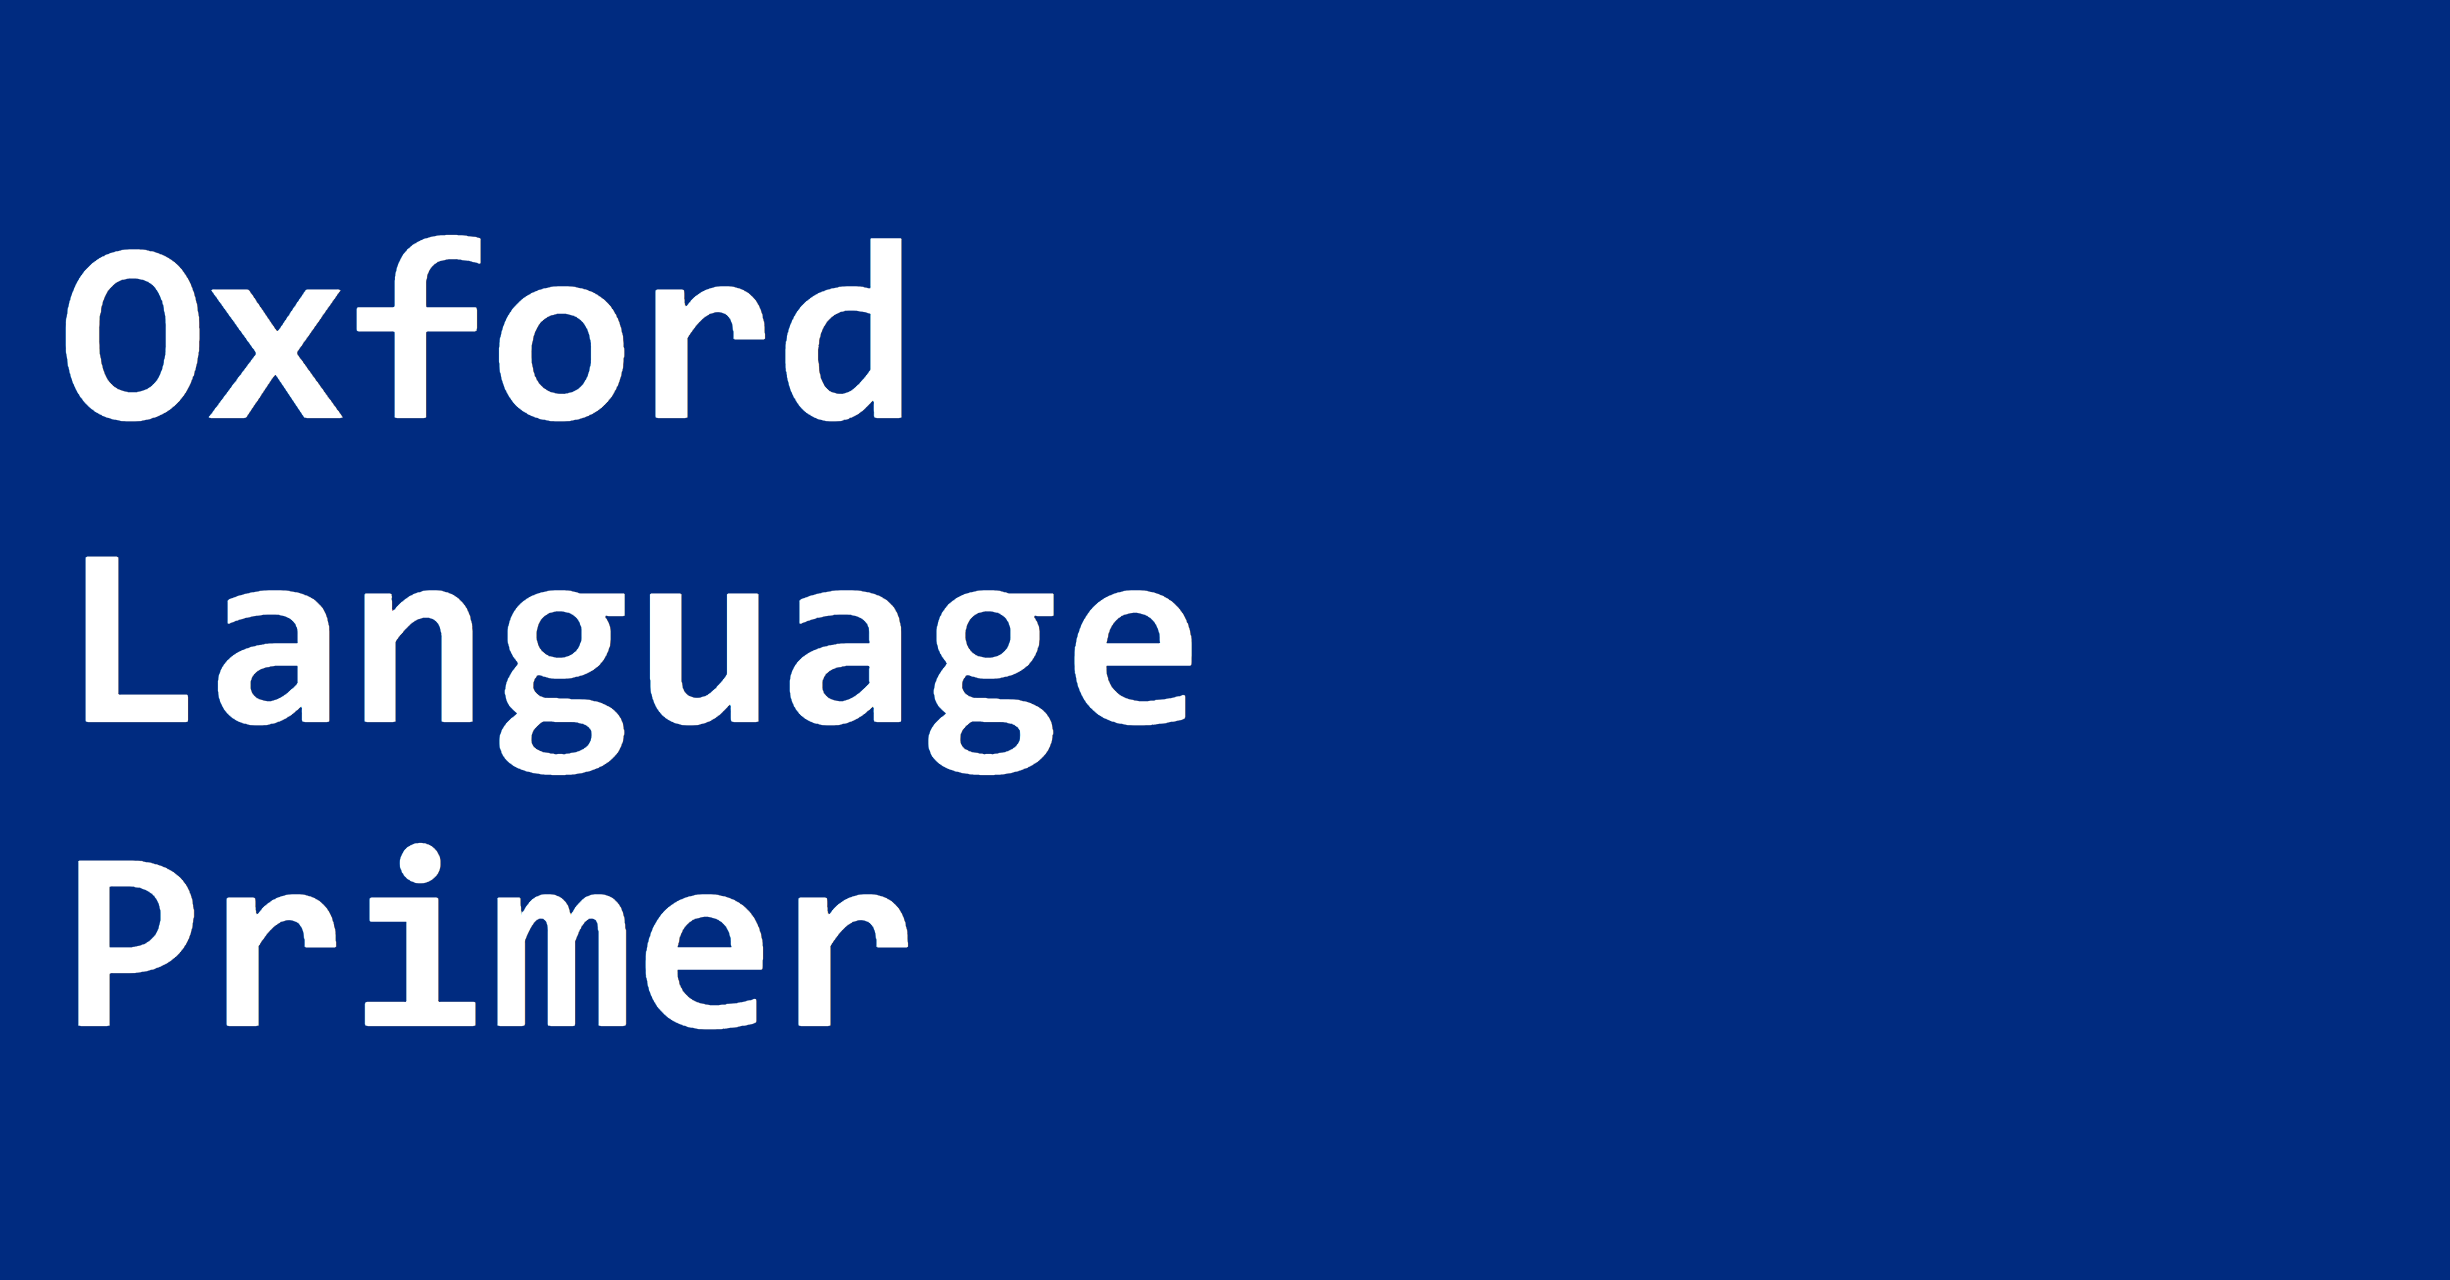 The text Oxford Language Technology